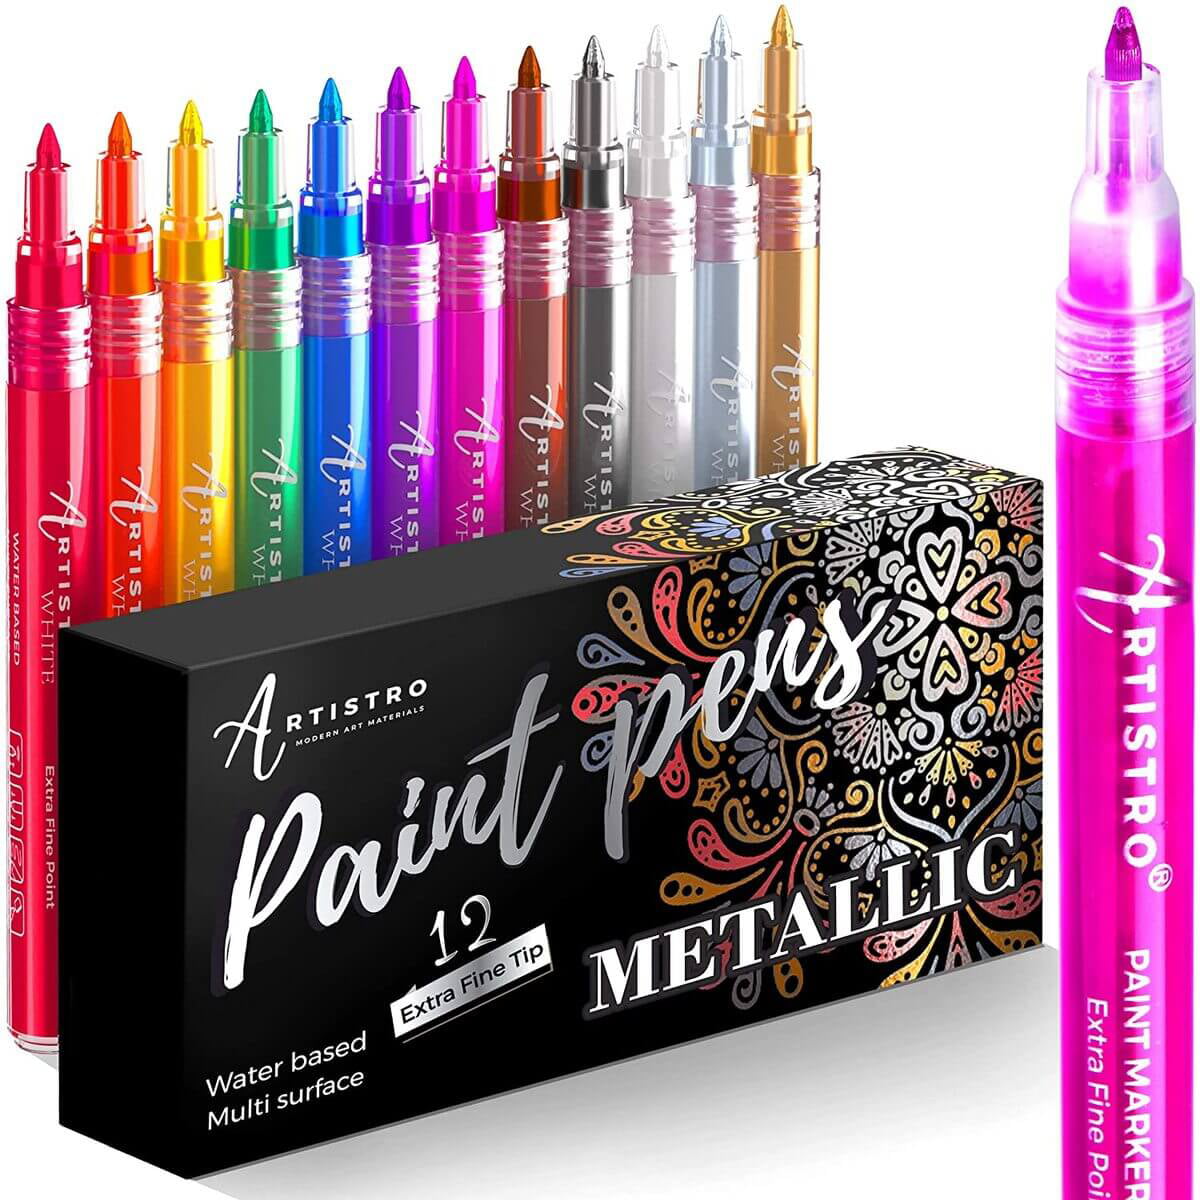 Glass Metal Ceramic Ideal for Pebbles Fabric Gain-Art Acrylic Paint Pens 3mm Rock Painting Markers 12 Pack Reversible Tip Wood 